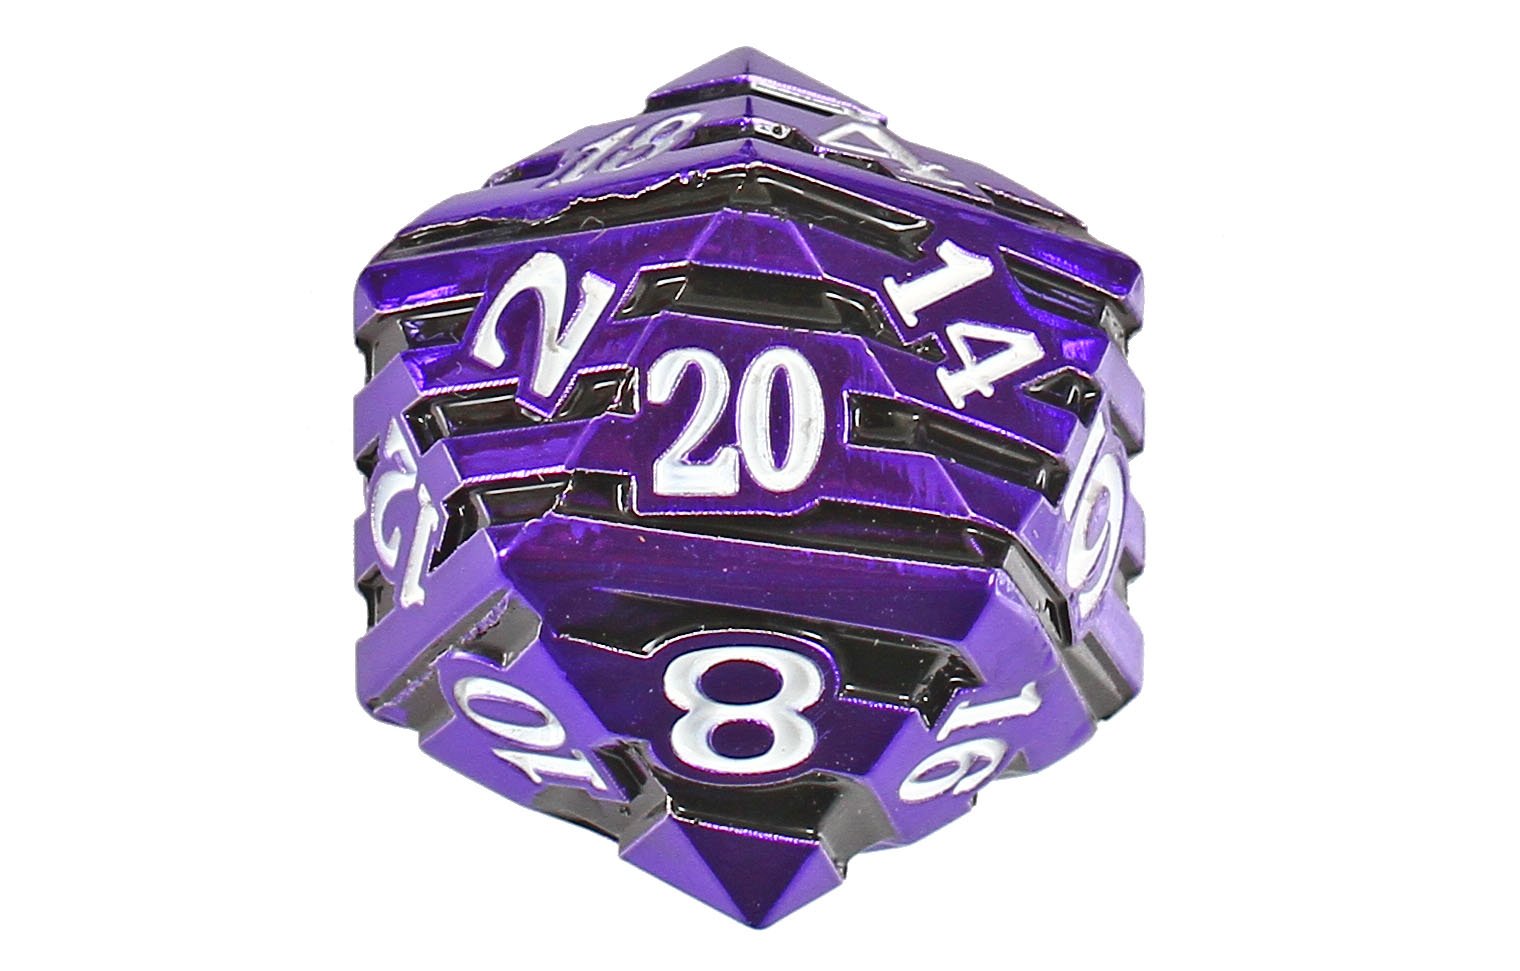 Things To Consider Before Buying A DnD Dice Set